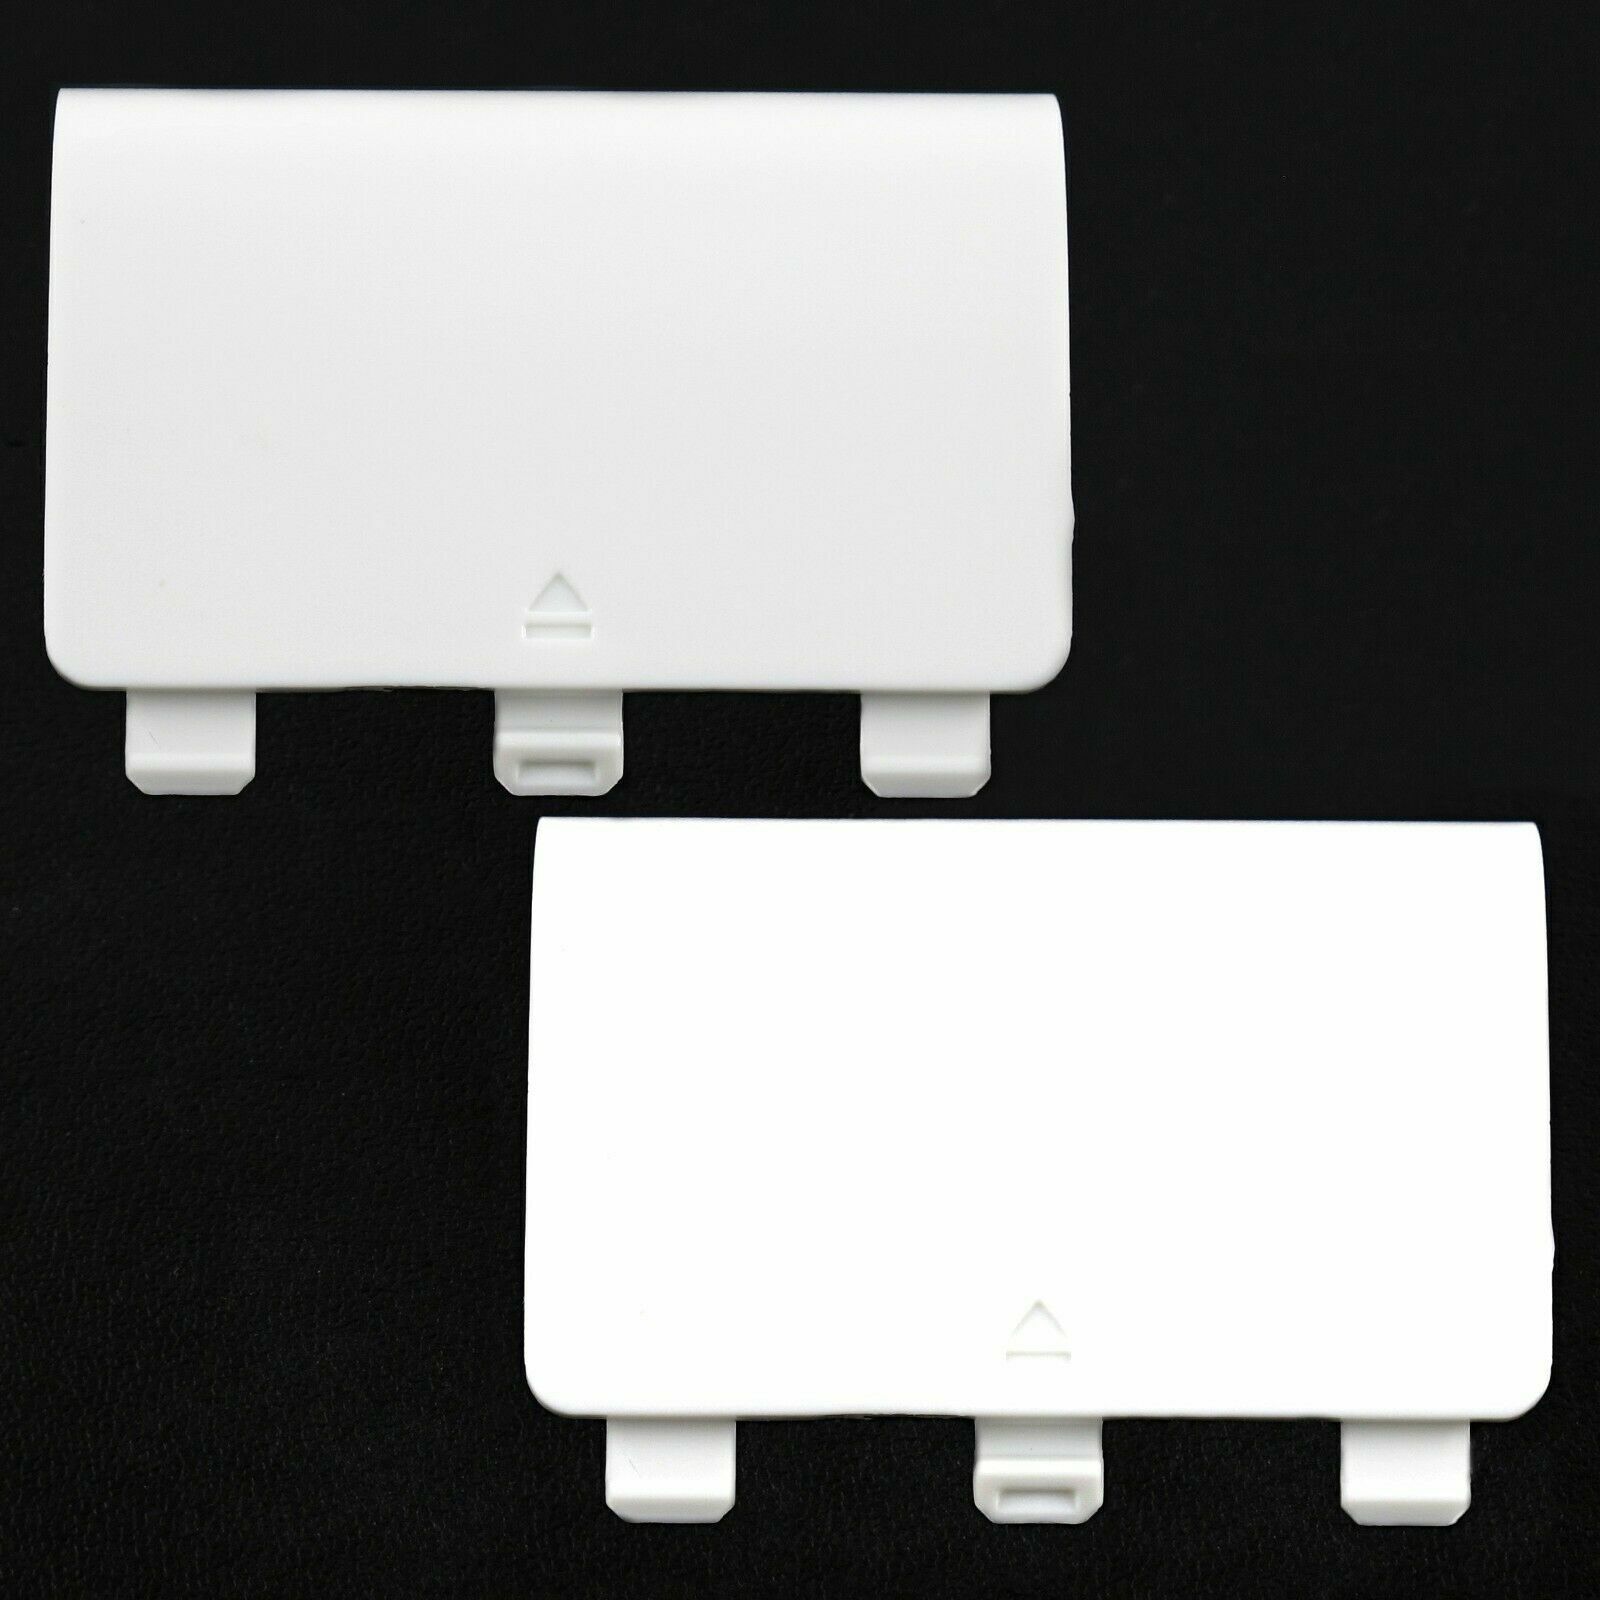 Lot of 2 Battery Cover Lid Shell Door for Xbox One S X 1537 1697 1708 White Unbranded Does not apply - фотография #2